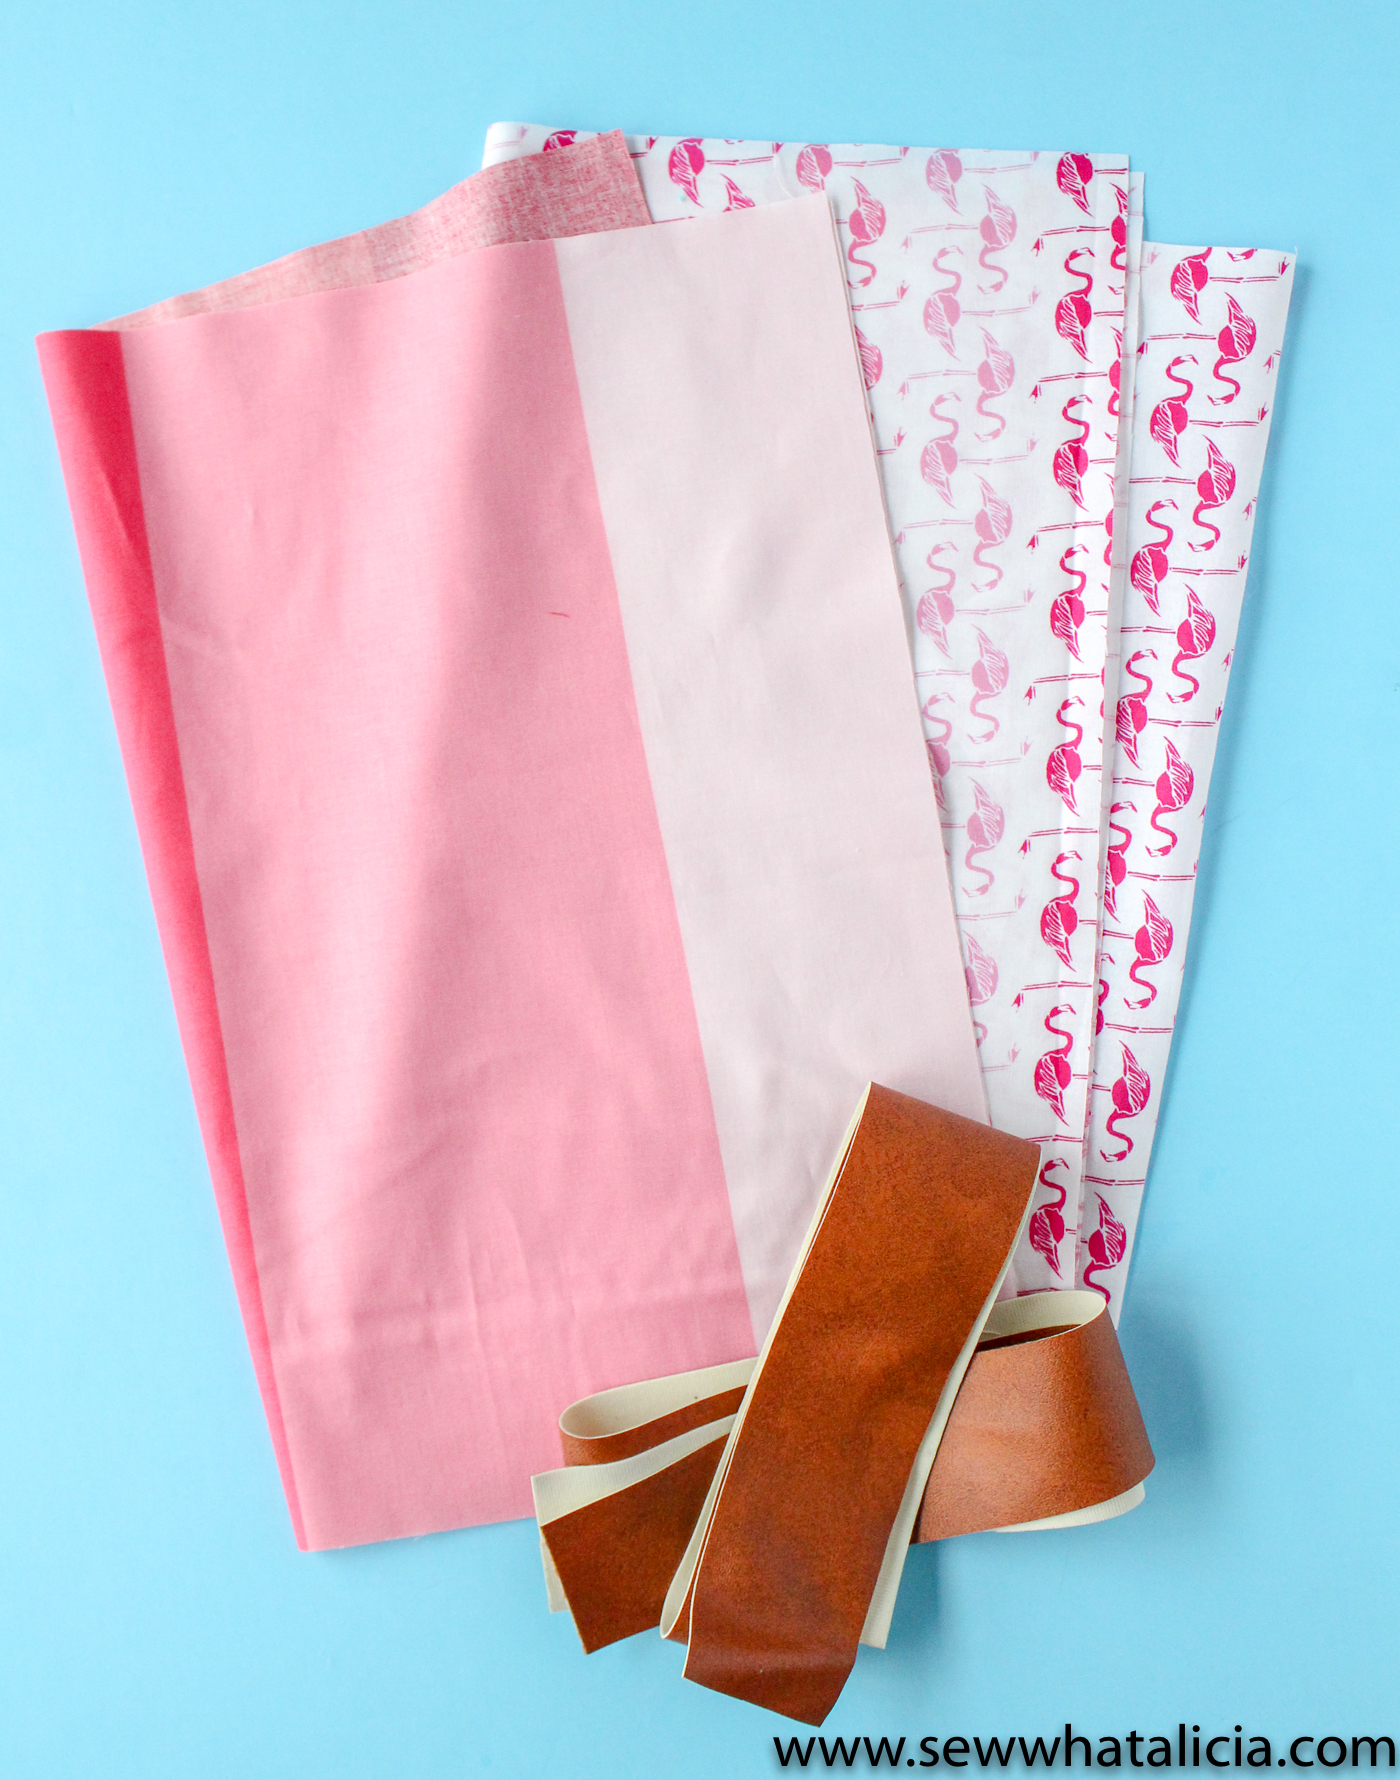 How to Make a Tote Bag: Supplies pictured, four pieces of fabric and two leather handles. | www.sewwhatalicia.com